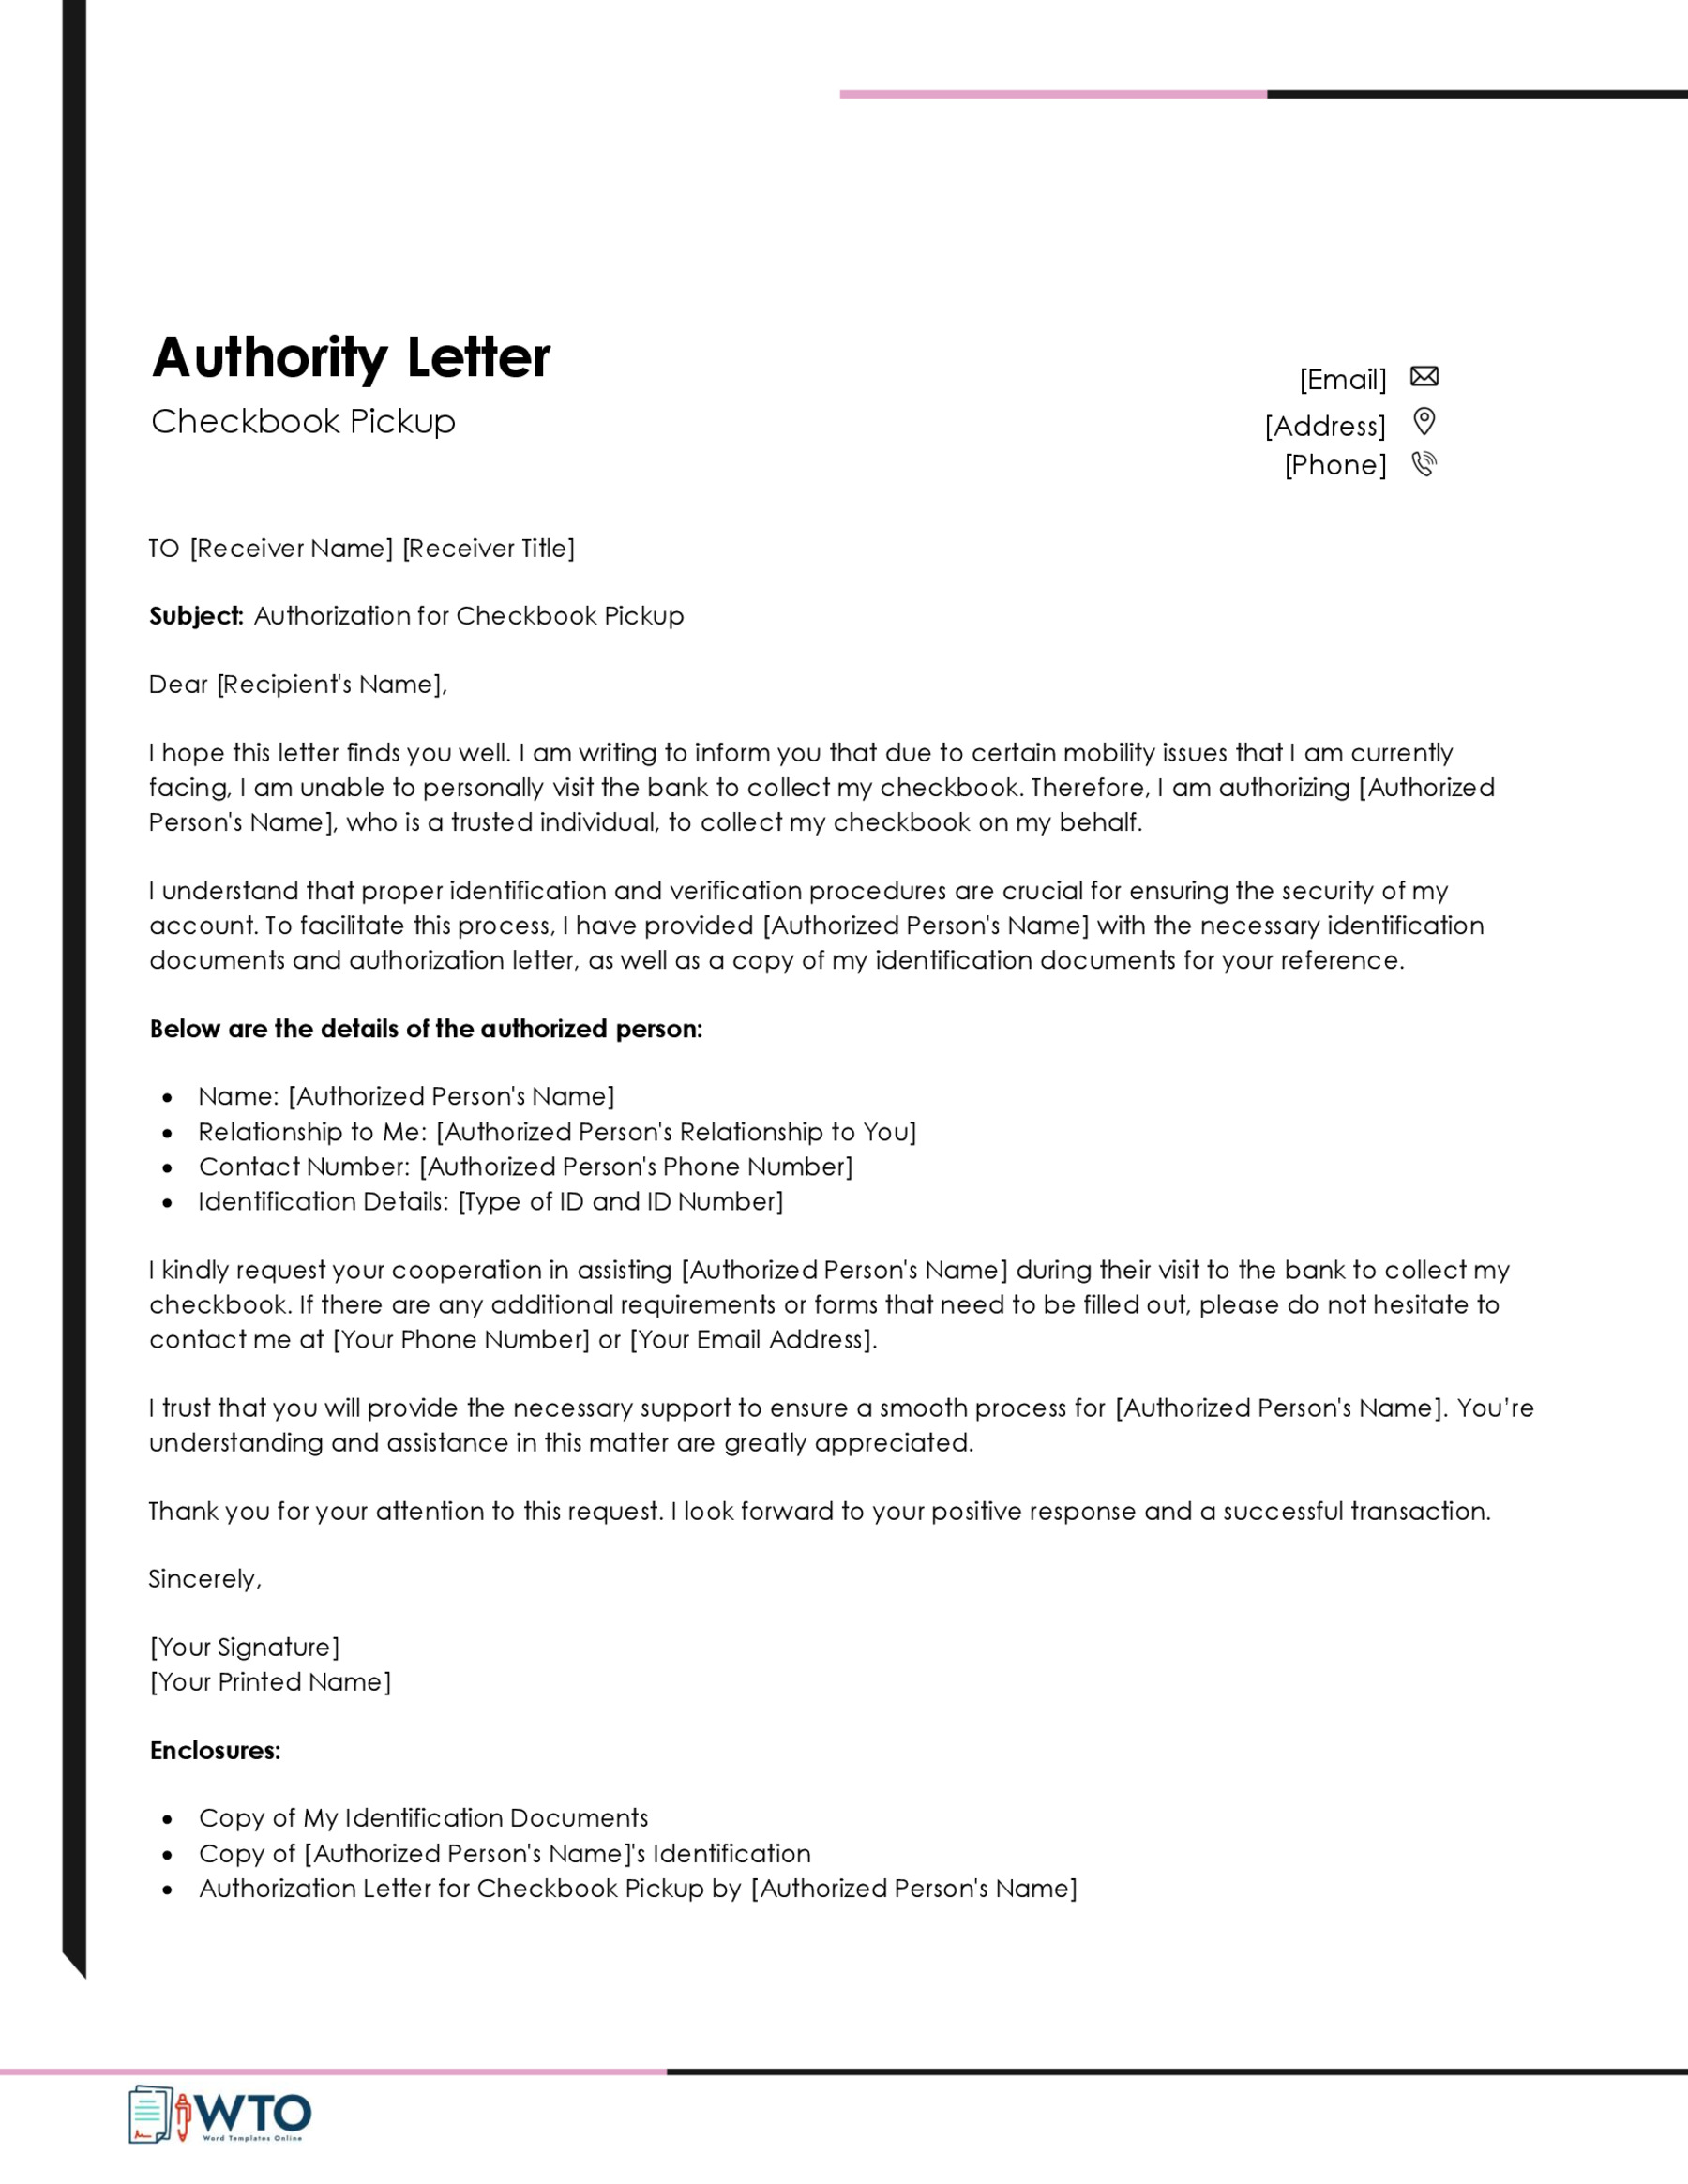 Writing an Authorization Letter for Checkbook Pickup Template-Free Downloadable